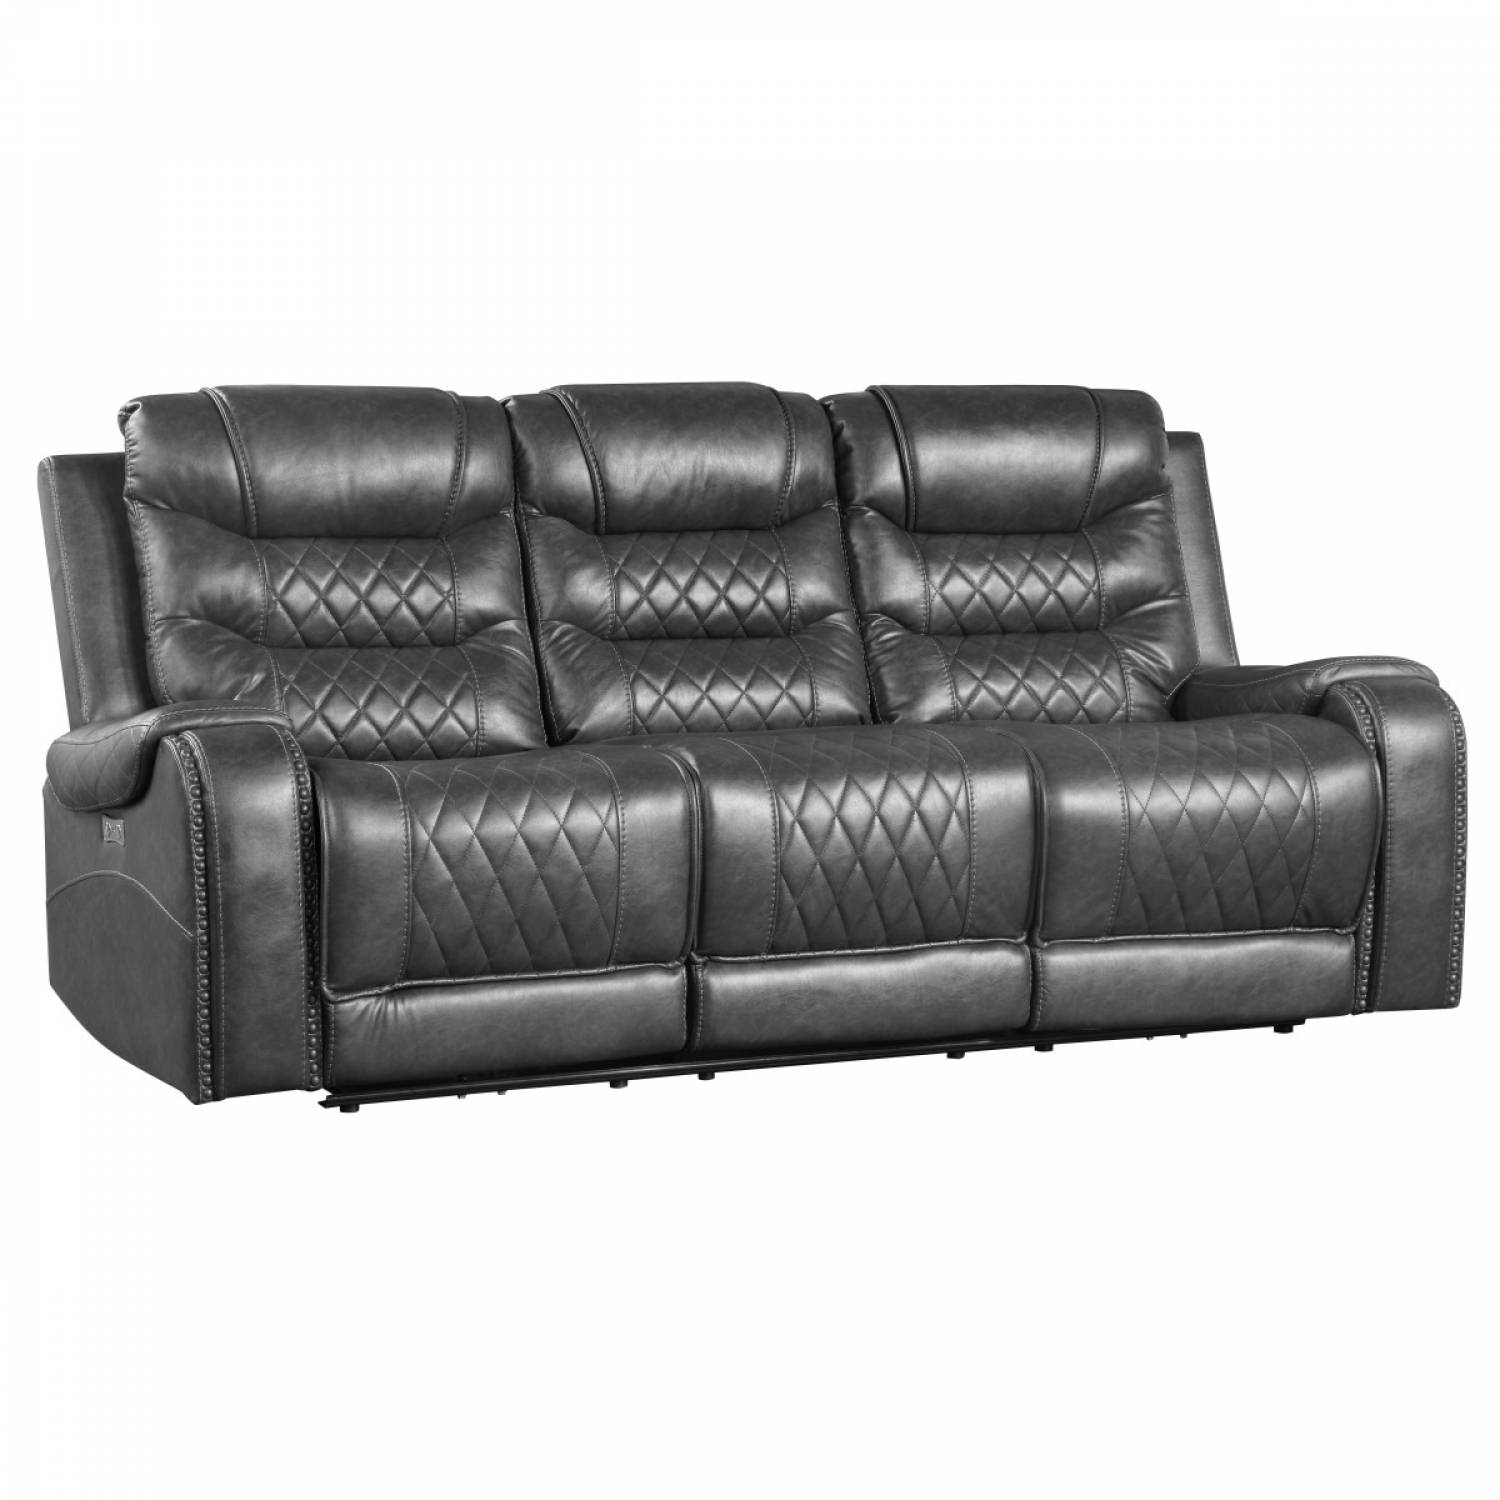 9405gy 3pw Power Double Reclining Sofa, Grey Leather Reclining Sofa With Cup Holders